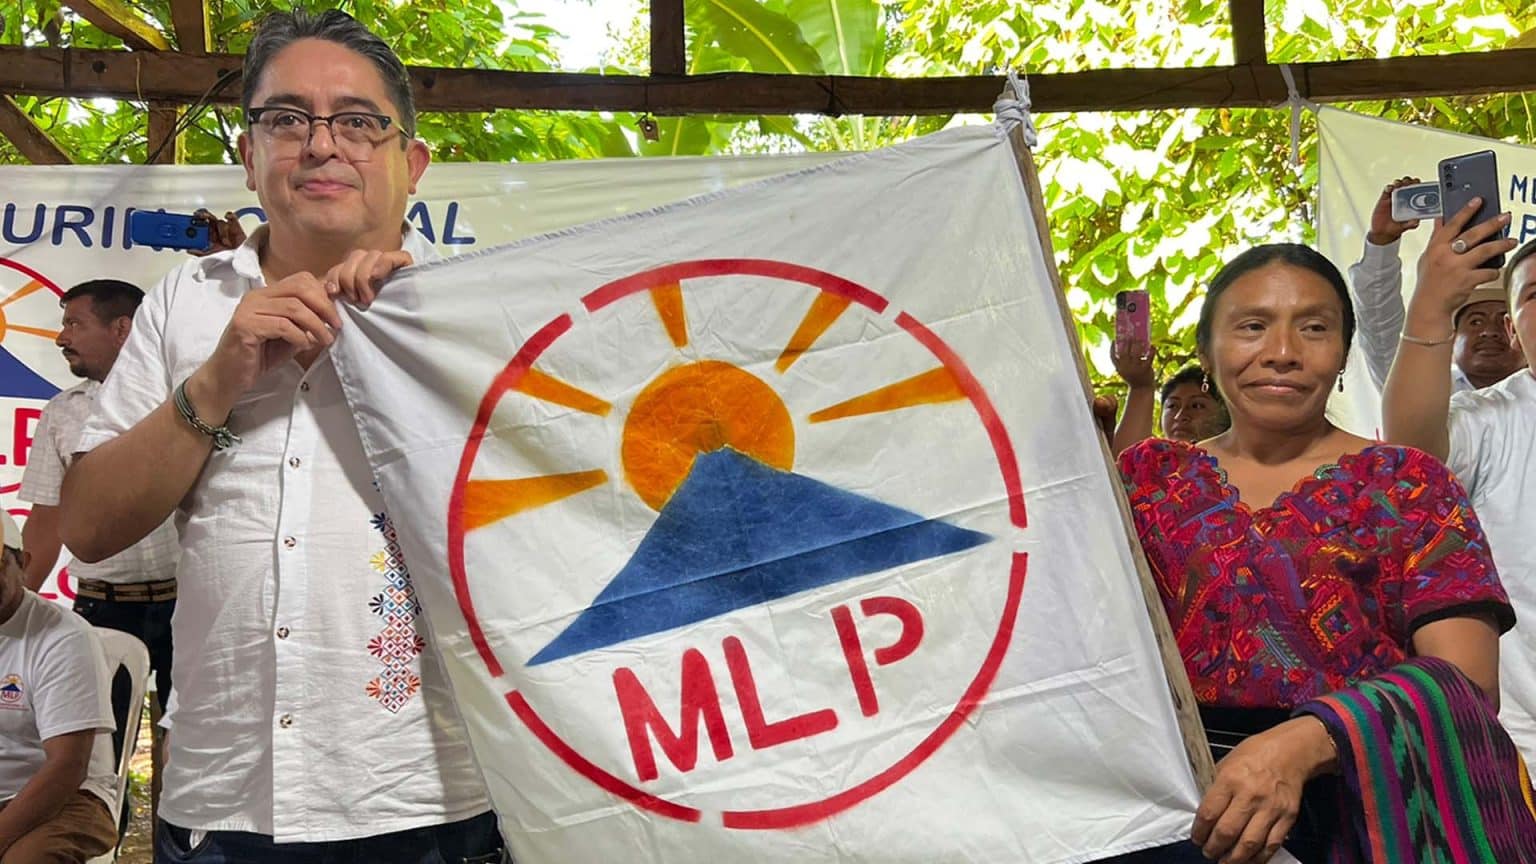 Thelma Cabrera and Jordán Rodas of Guatemala's Movement for the Liberation of the People (MLP) Party. File Photo.